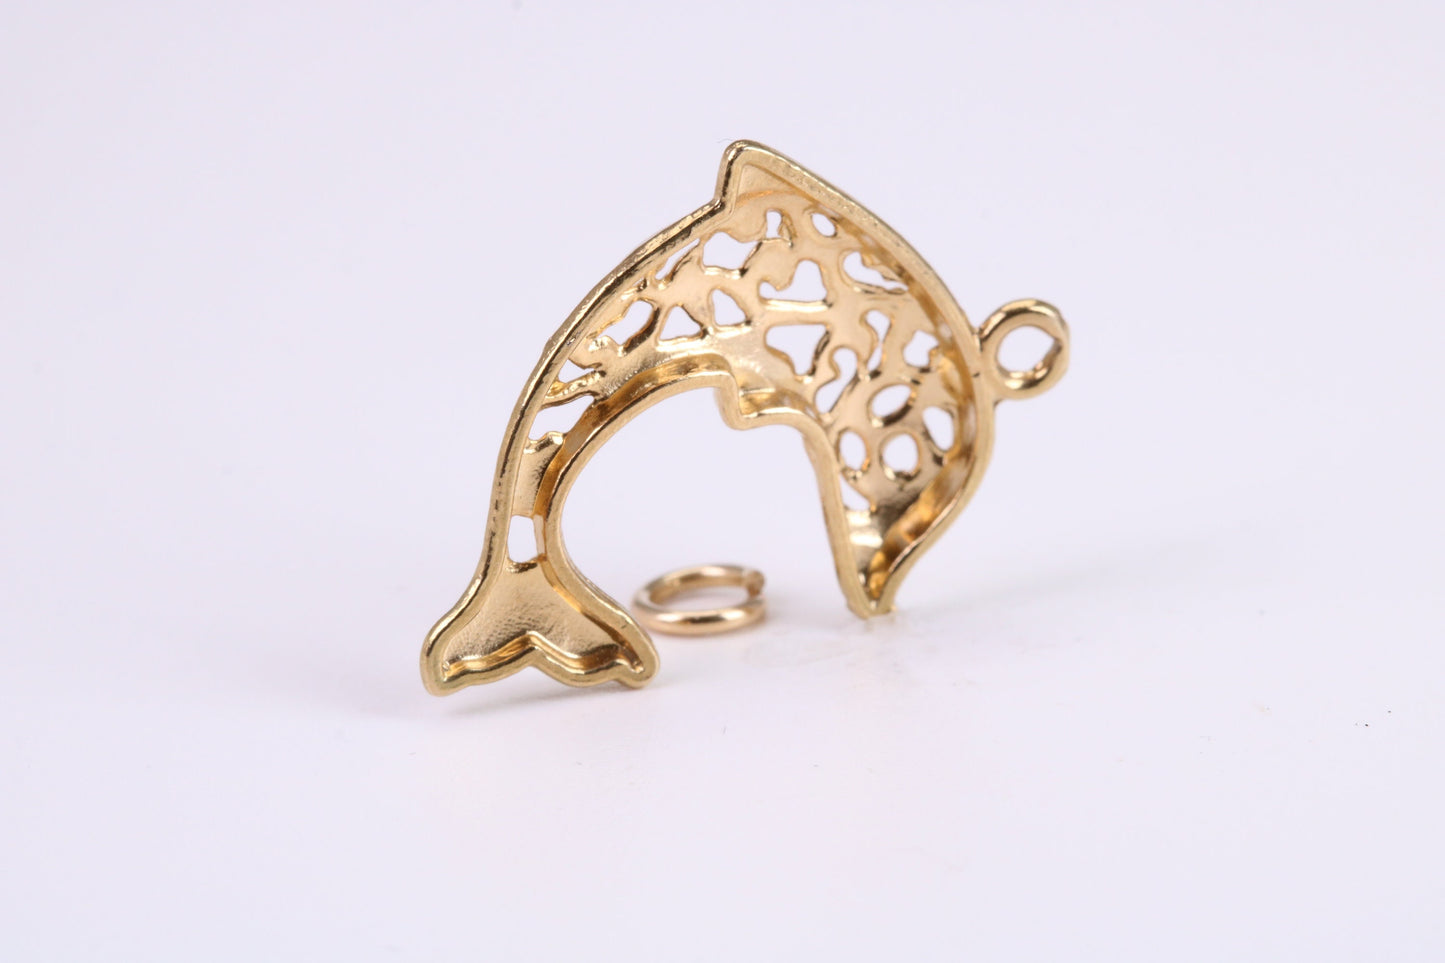 Fish Charm, Traditional Charm, Made from Solid Yellow Gold, British Hallmarked, Complete with Attachment Link